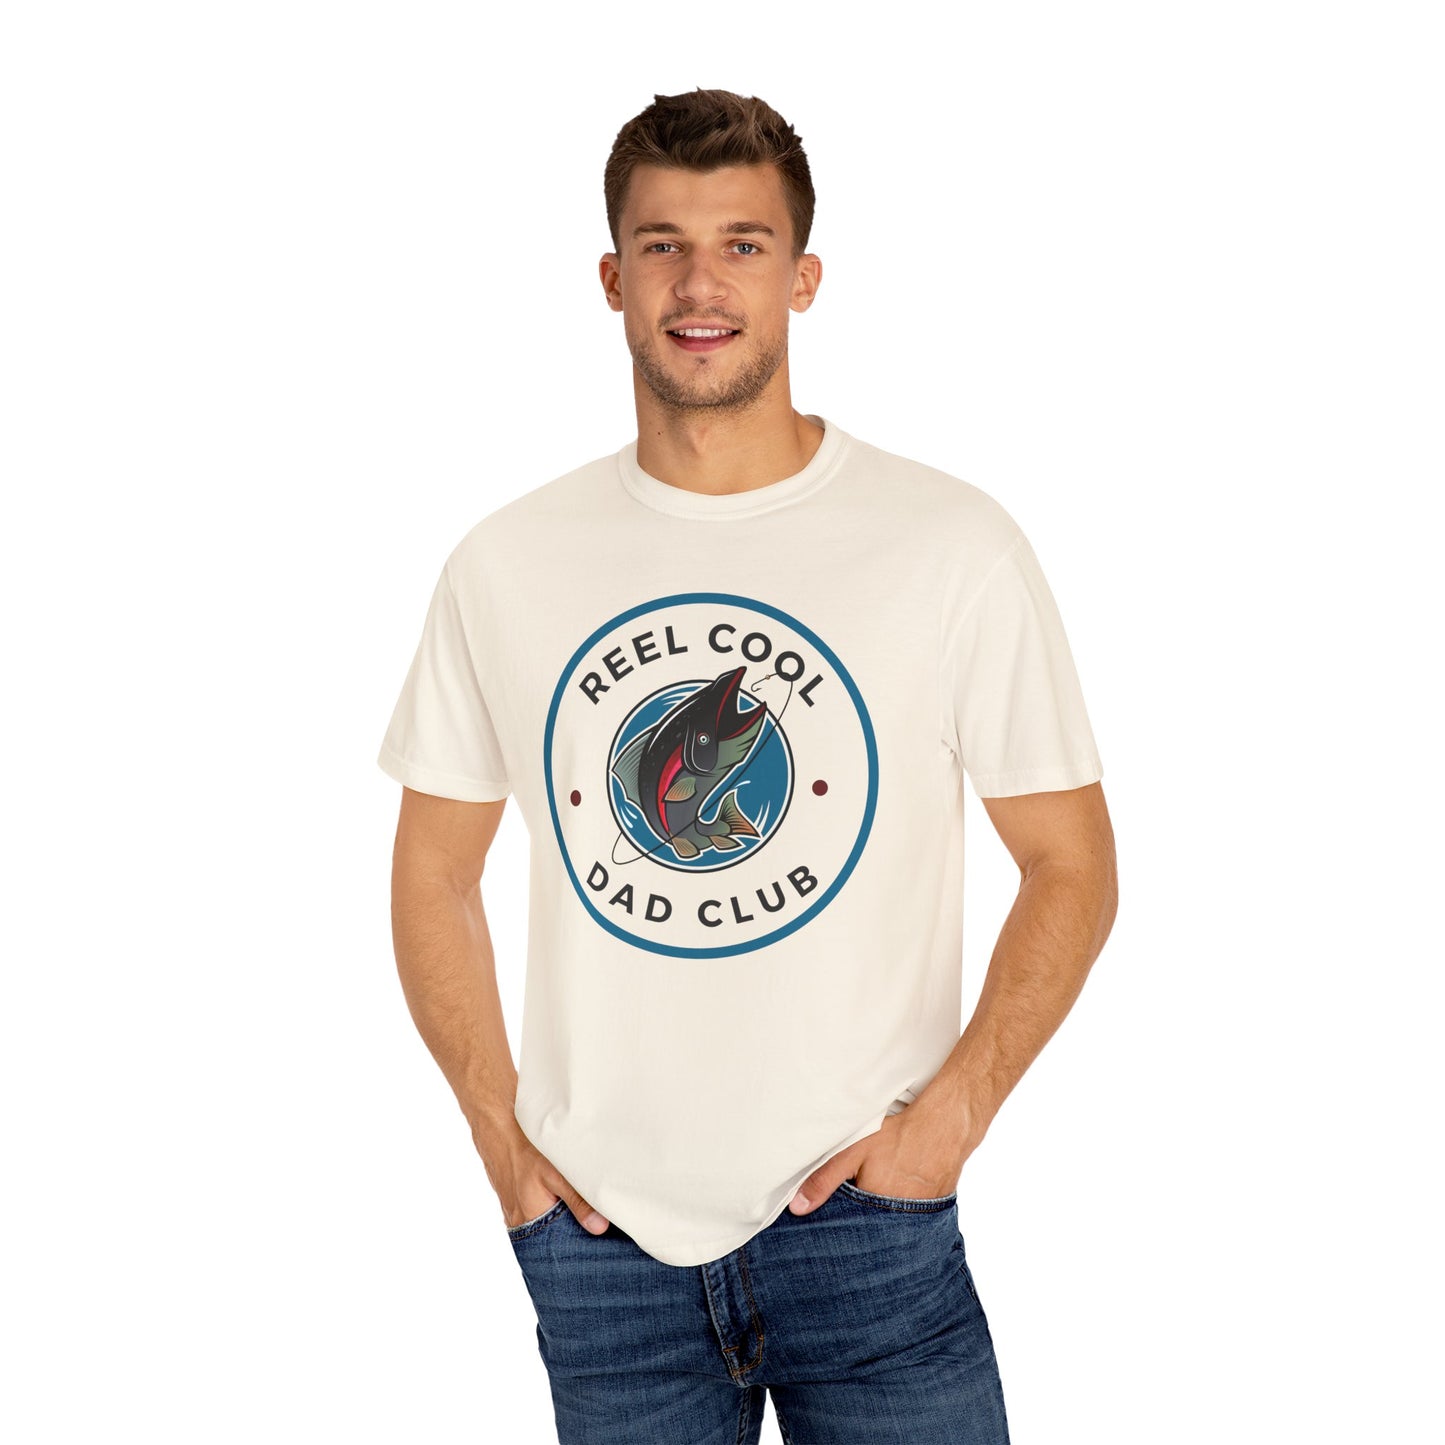 Reel Cool Dads Club T-Shirt - Comfort Colors 1717, Ultra-Soft Ring-Spun Cotton, Relaxed Fit